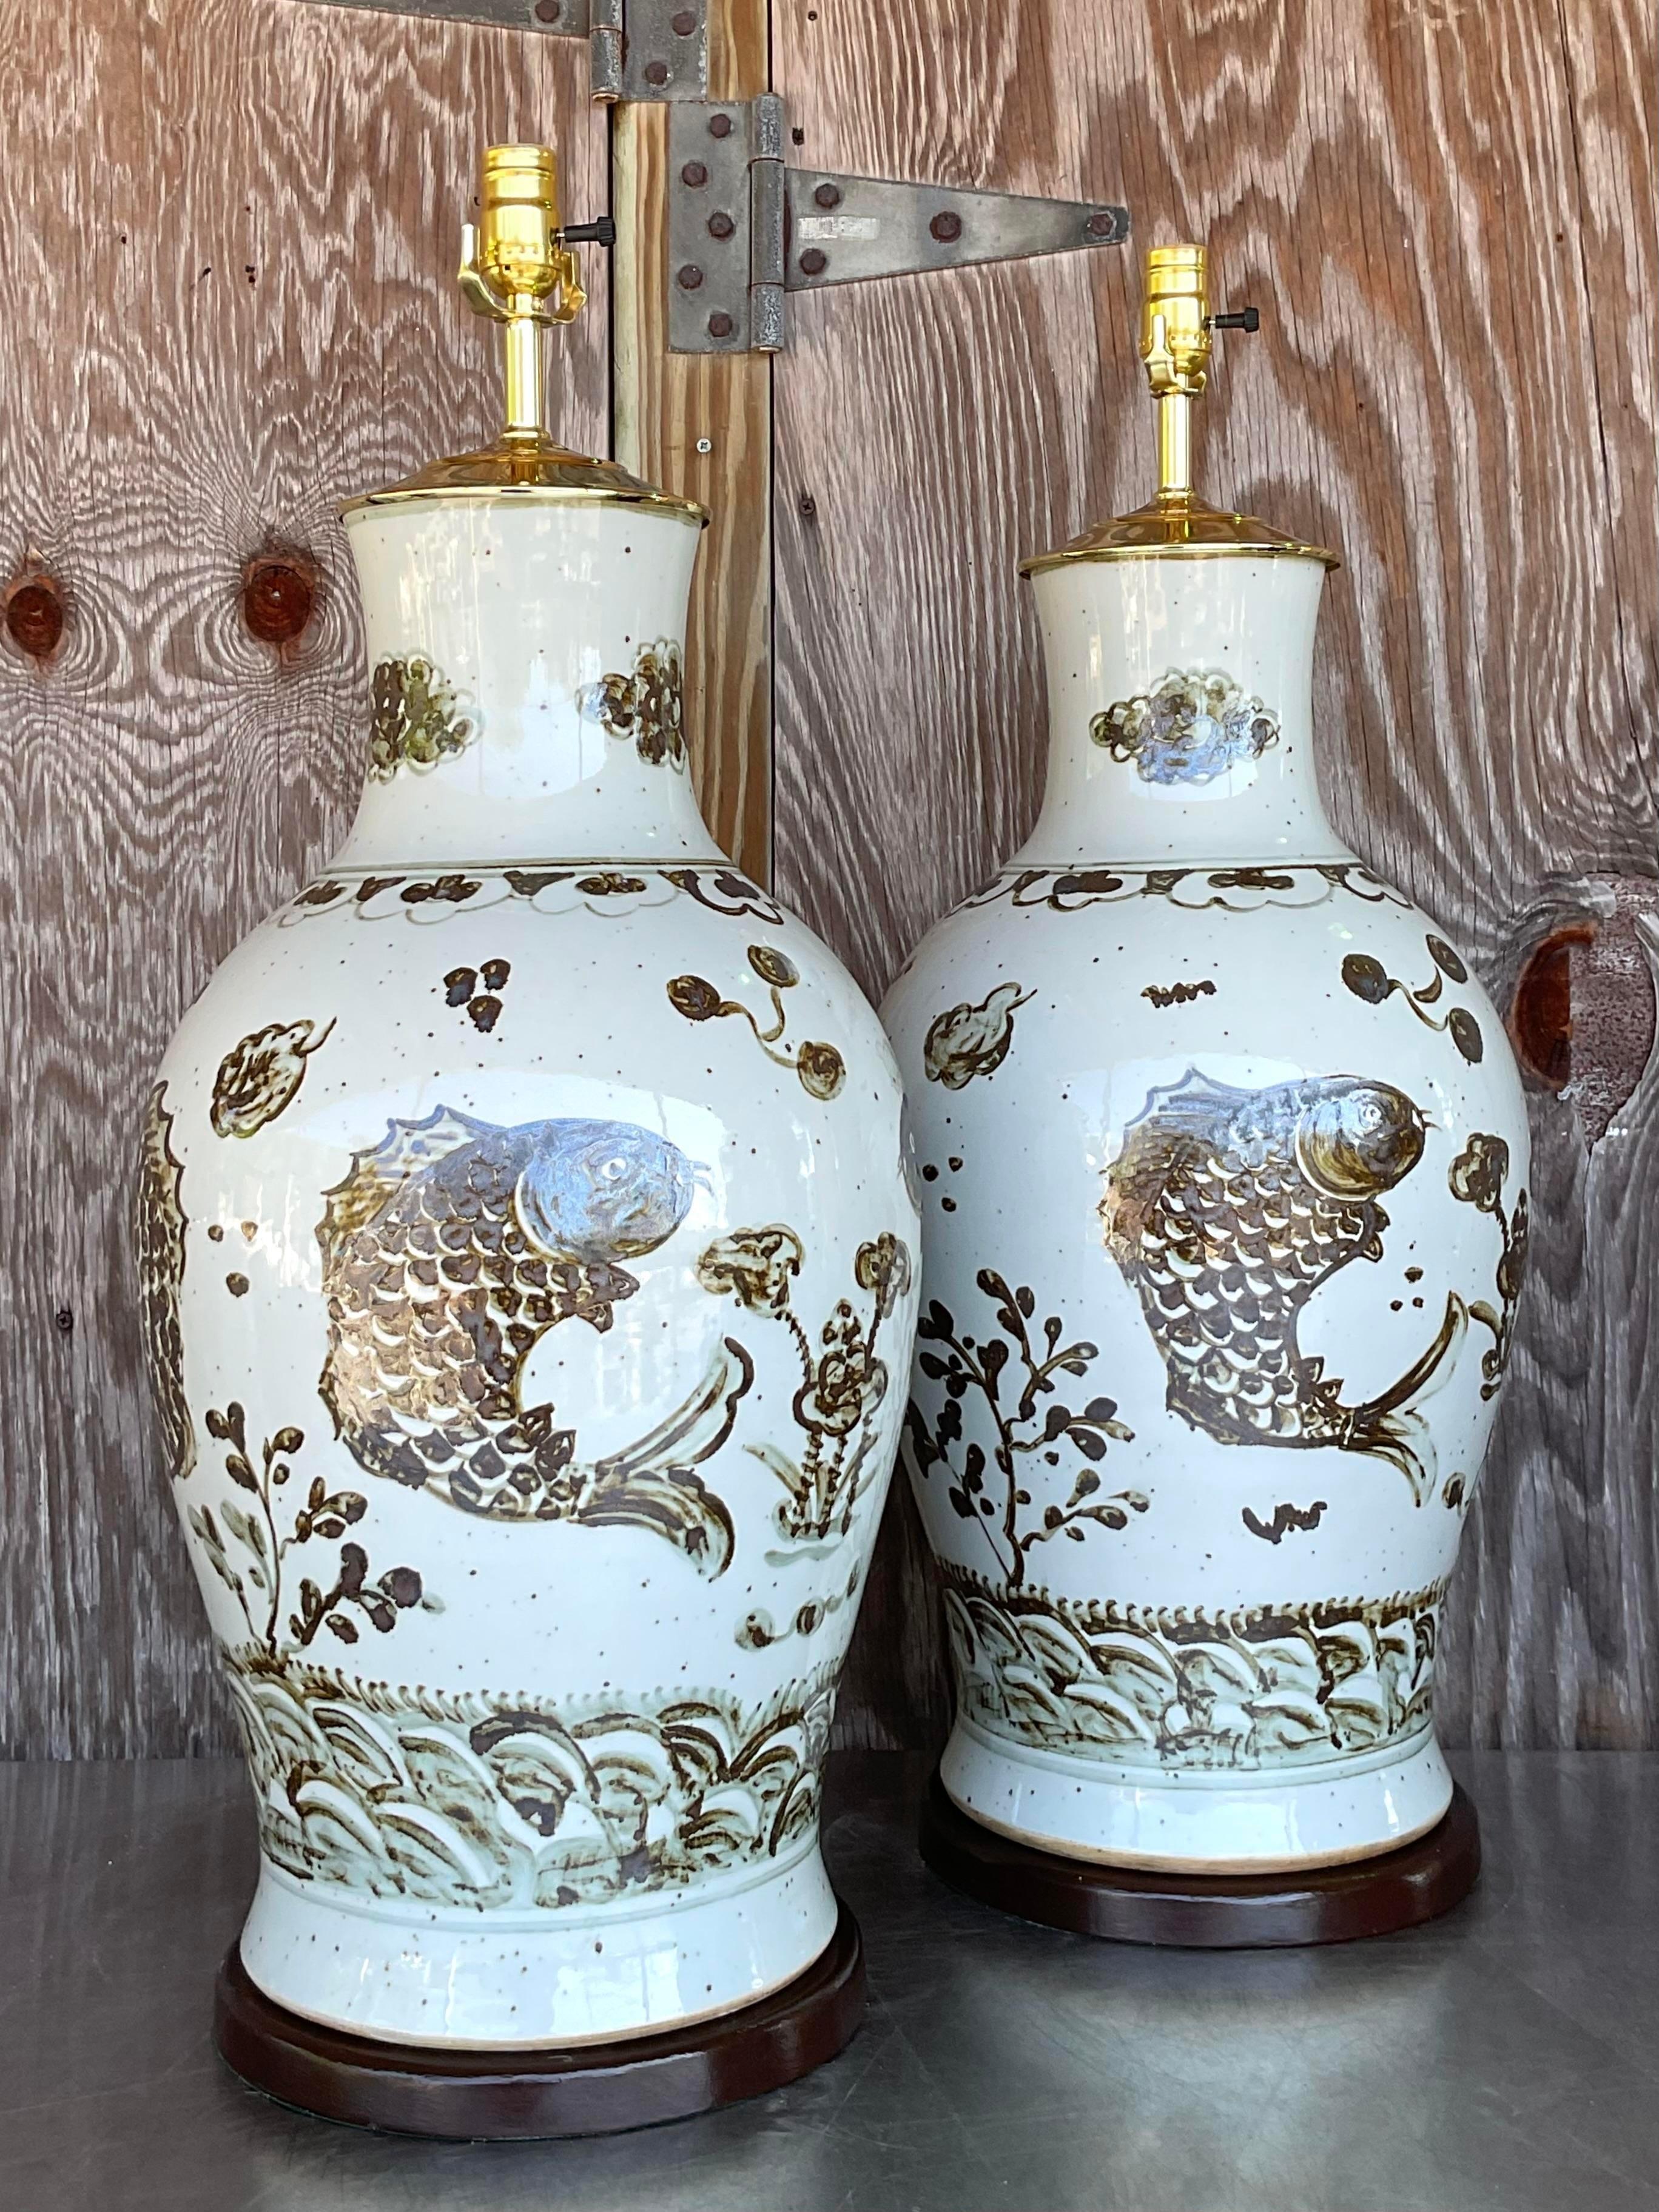 Vintage Regency Glazed Ceramic Koi Fish Lamps - a Pair In Good Condition For Sale In west palm beach, FL